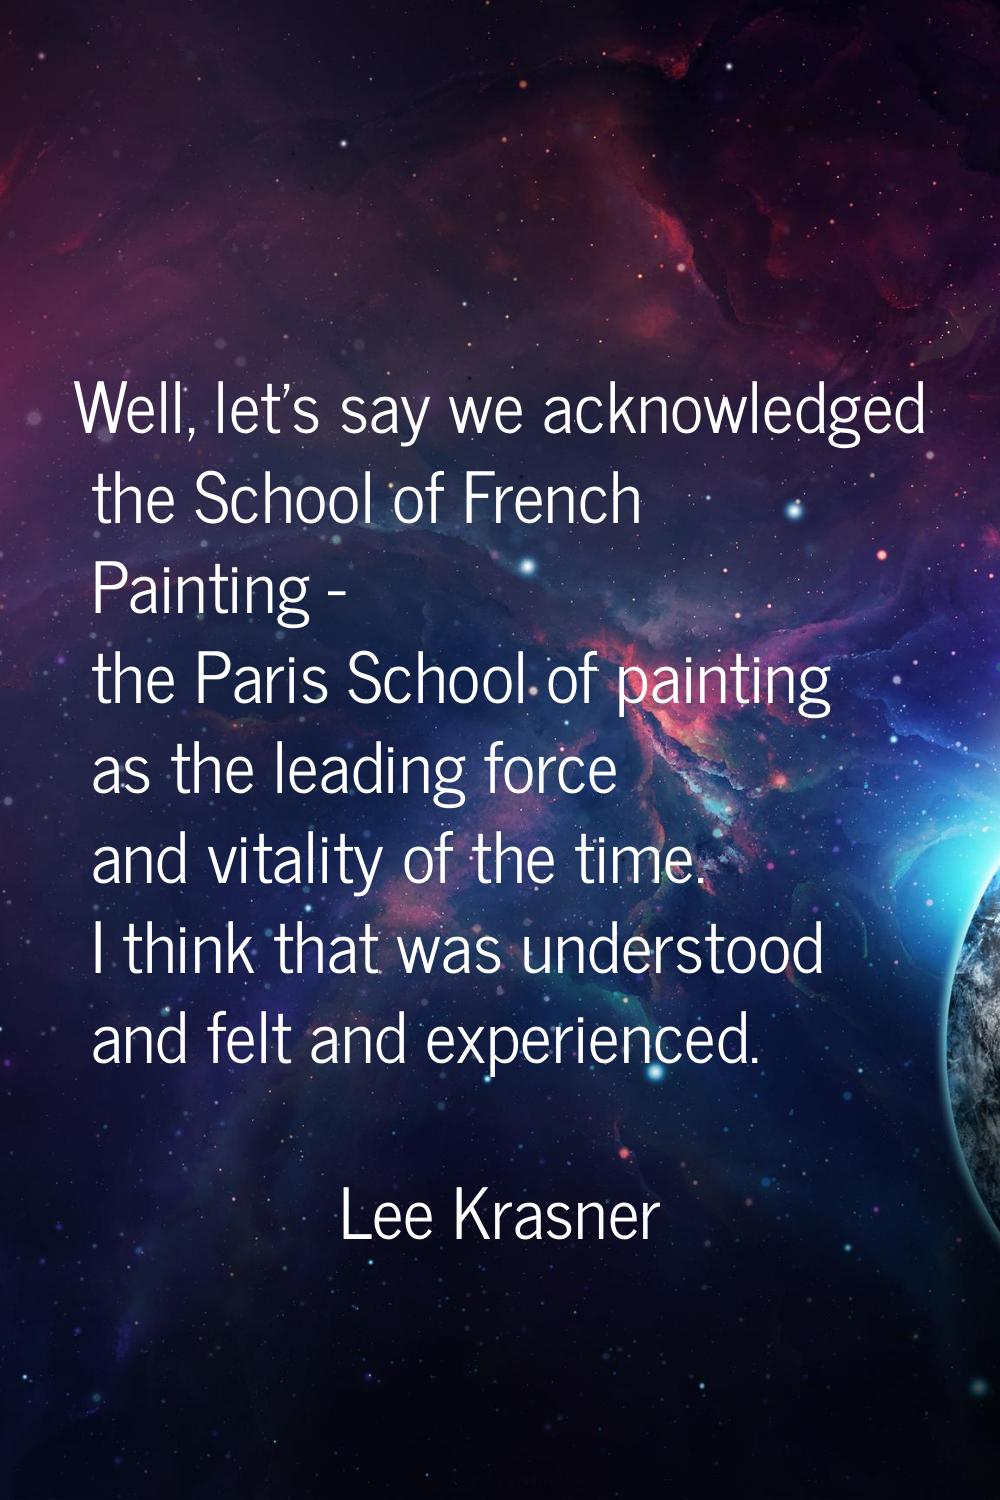 Well, let's say we acknowledged the School of French Painting - the Paris School of painting as the